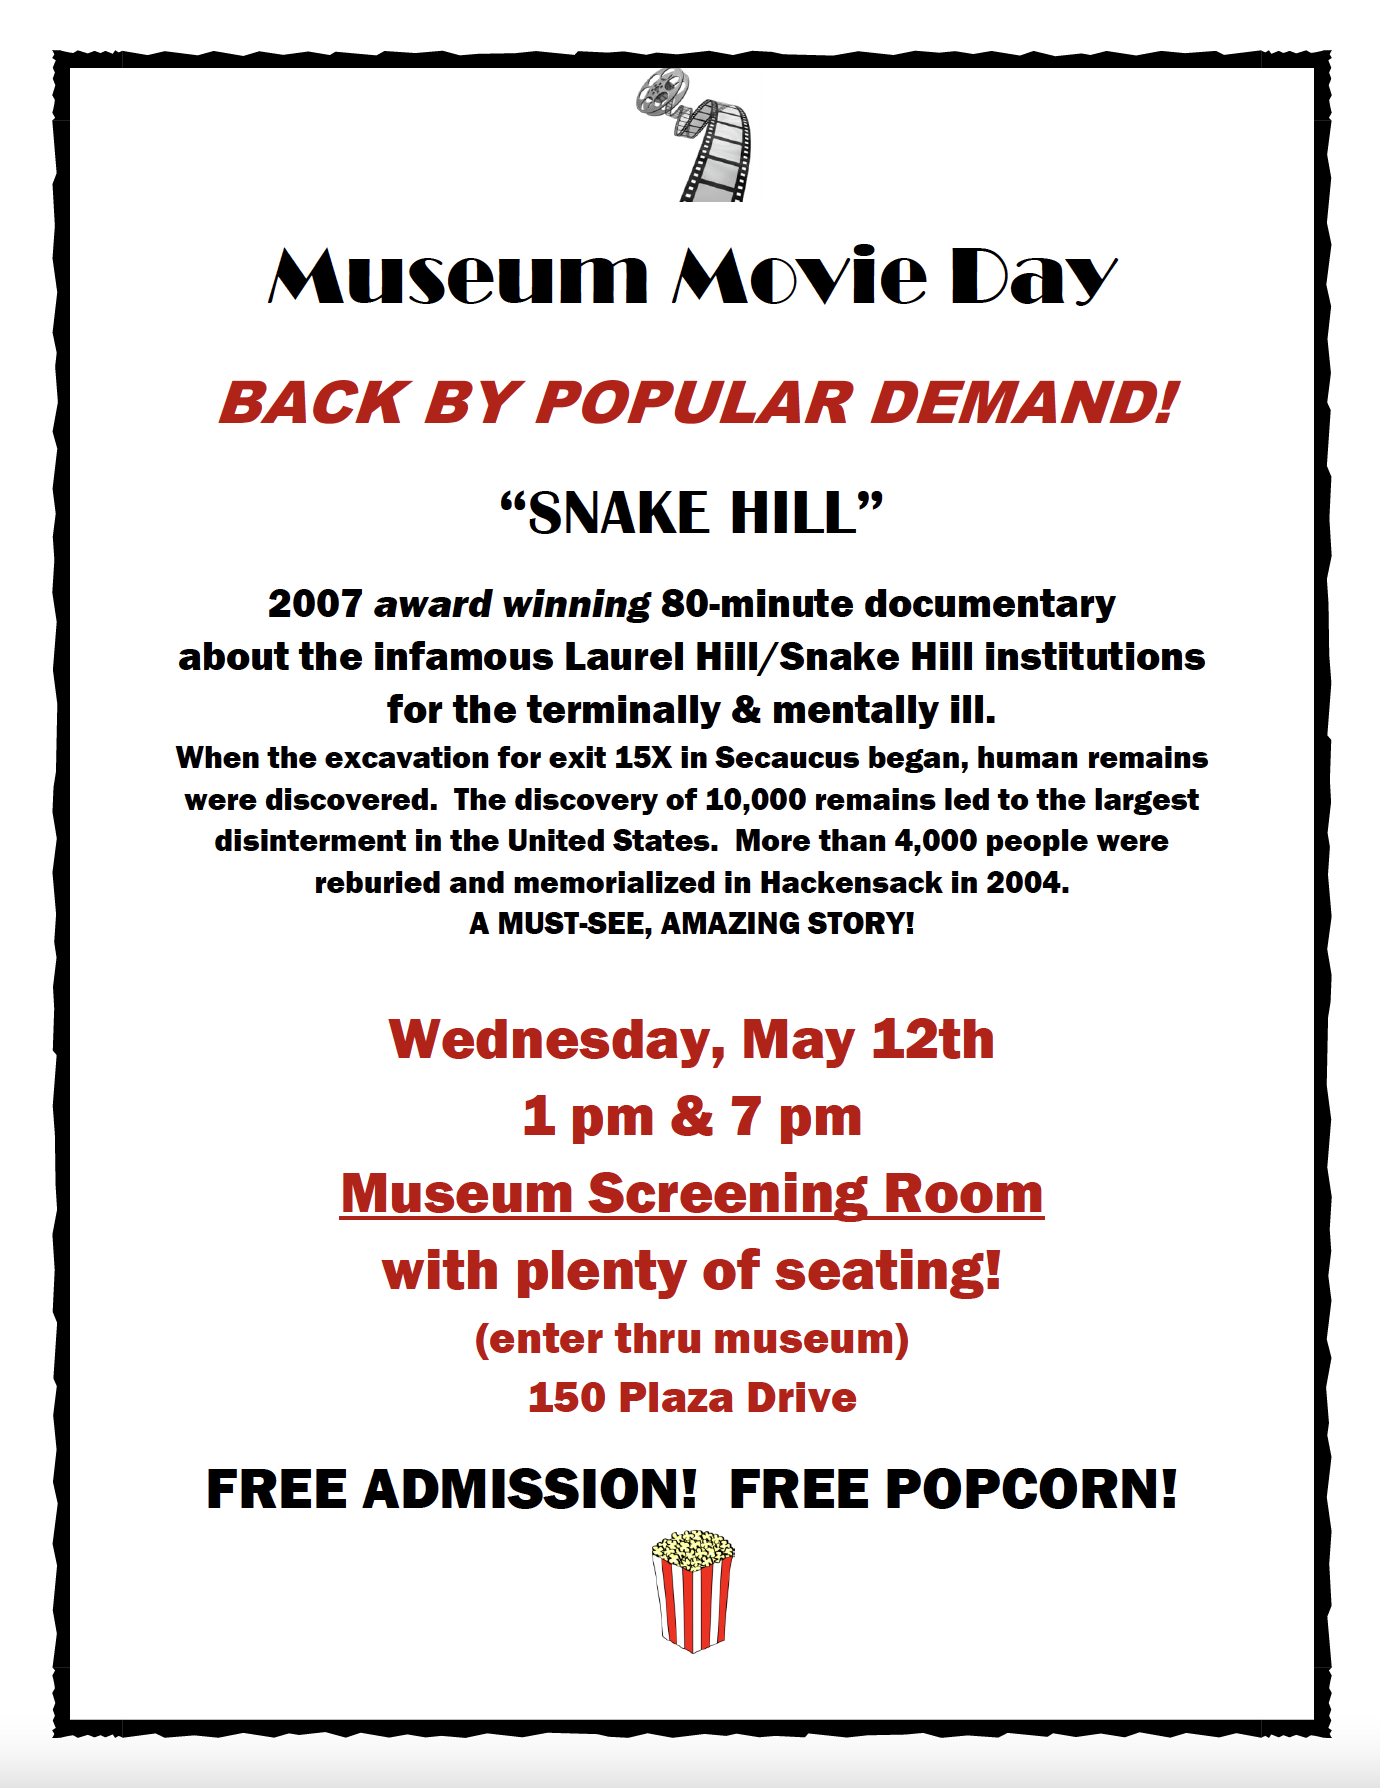 Museum Movie Day Flyer